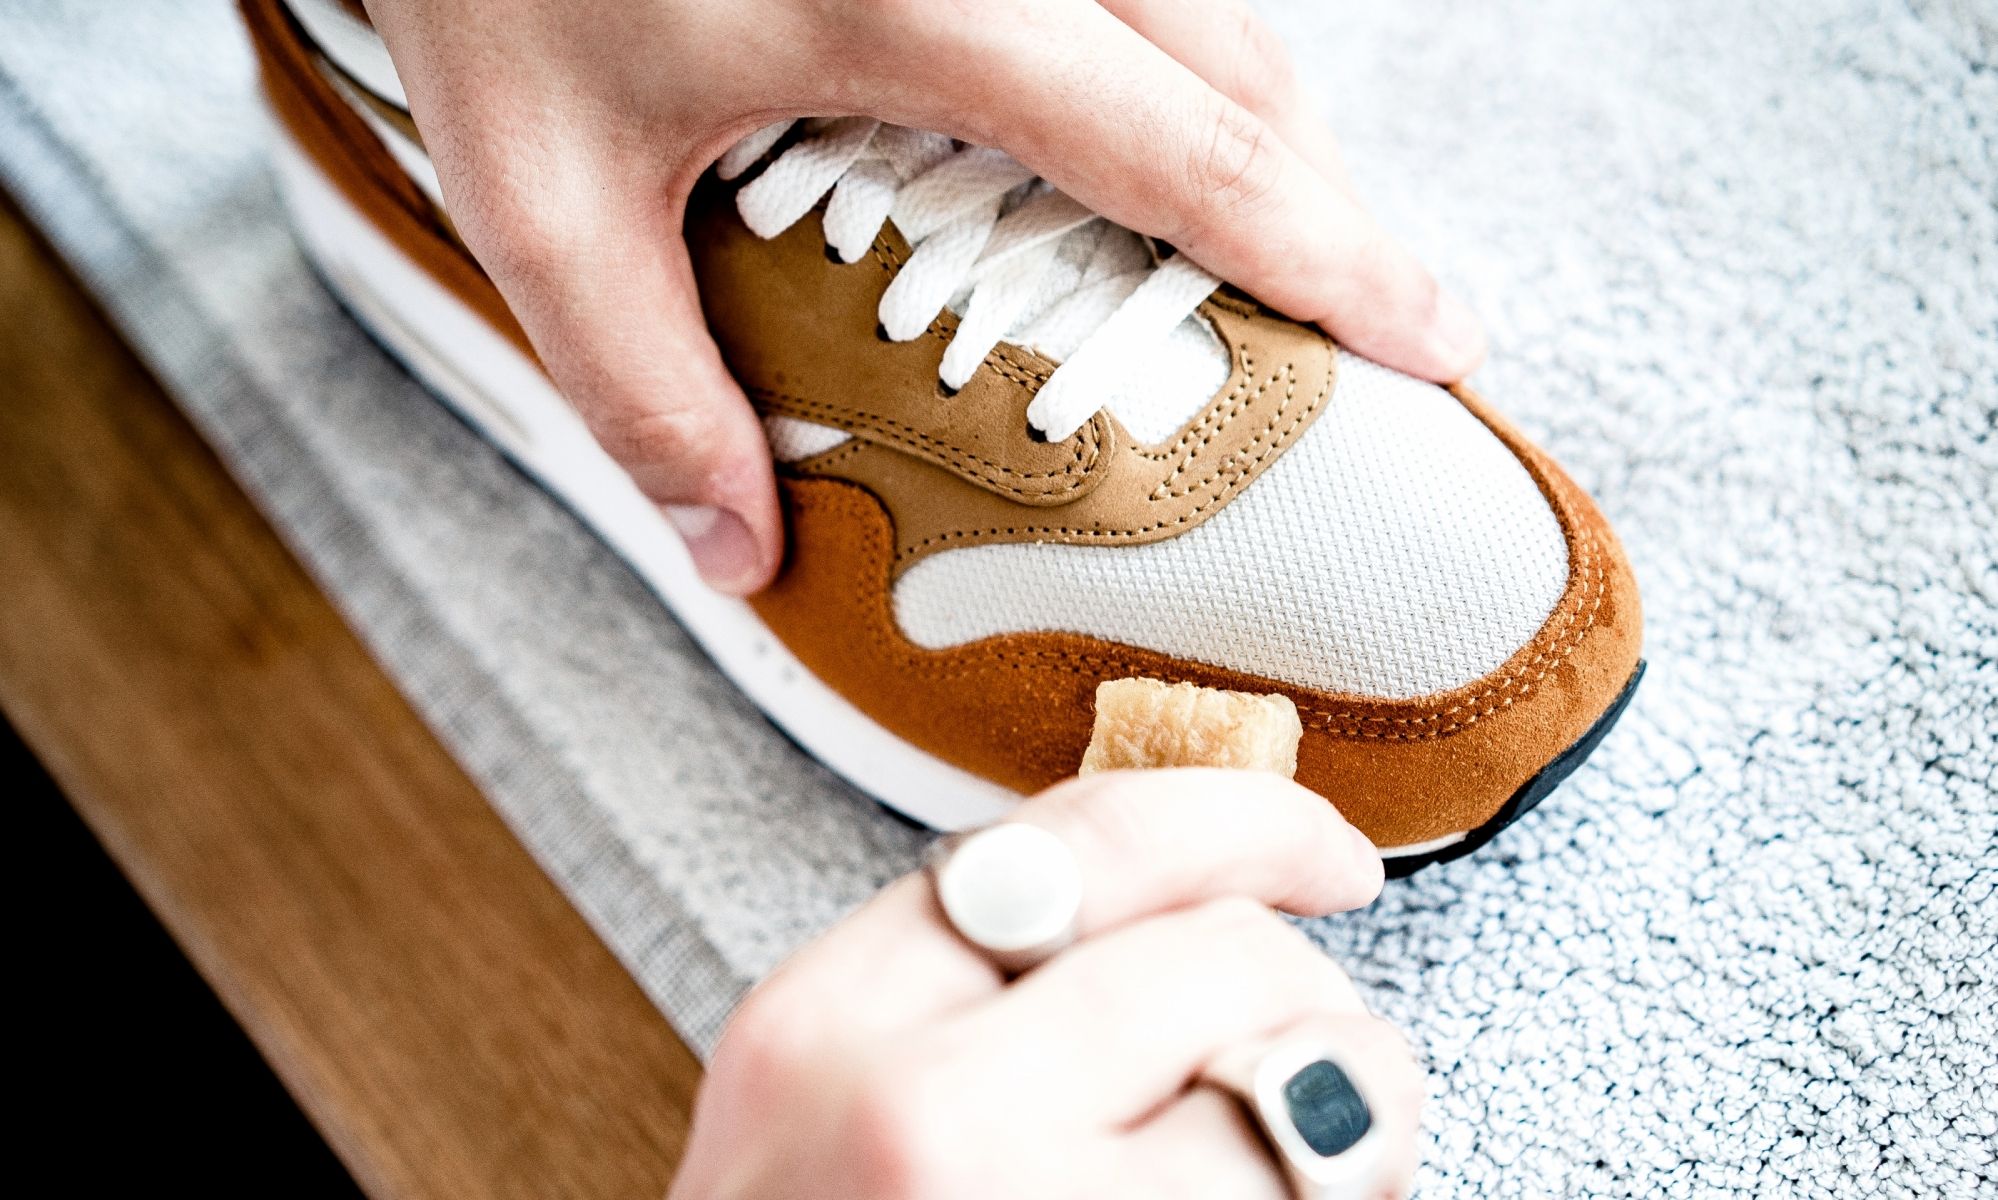 Sneaker care: Here's a step-by-step guide on how to clean your